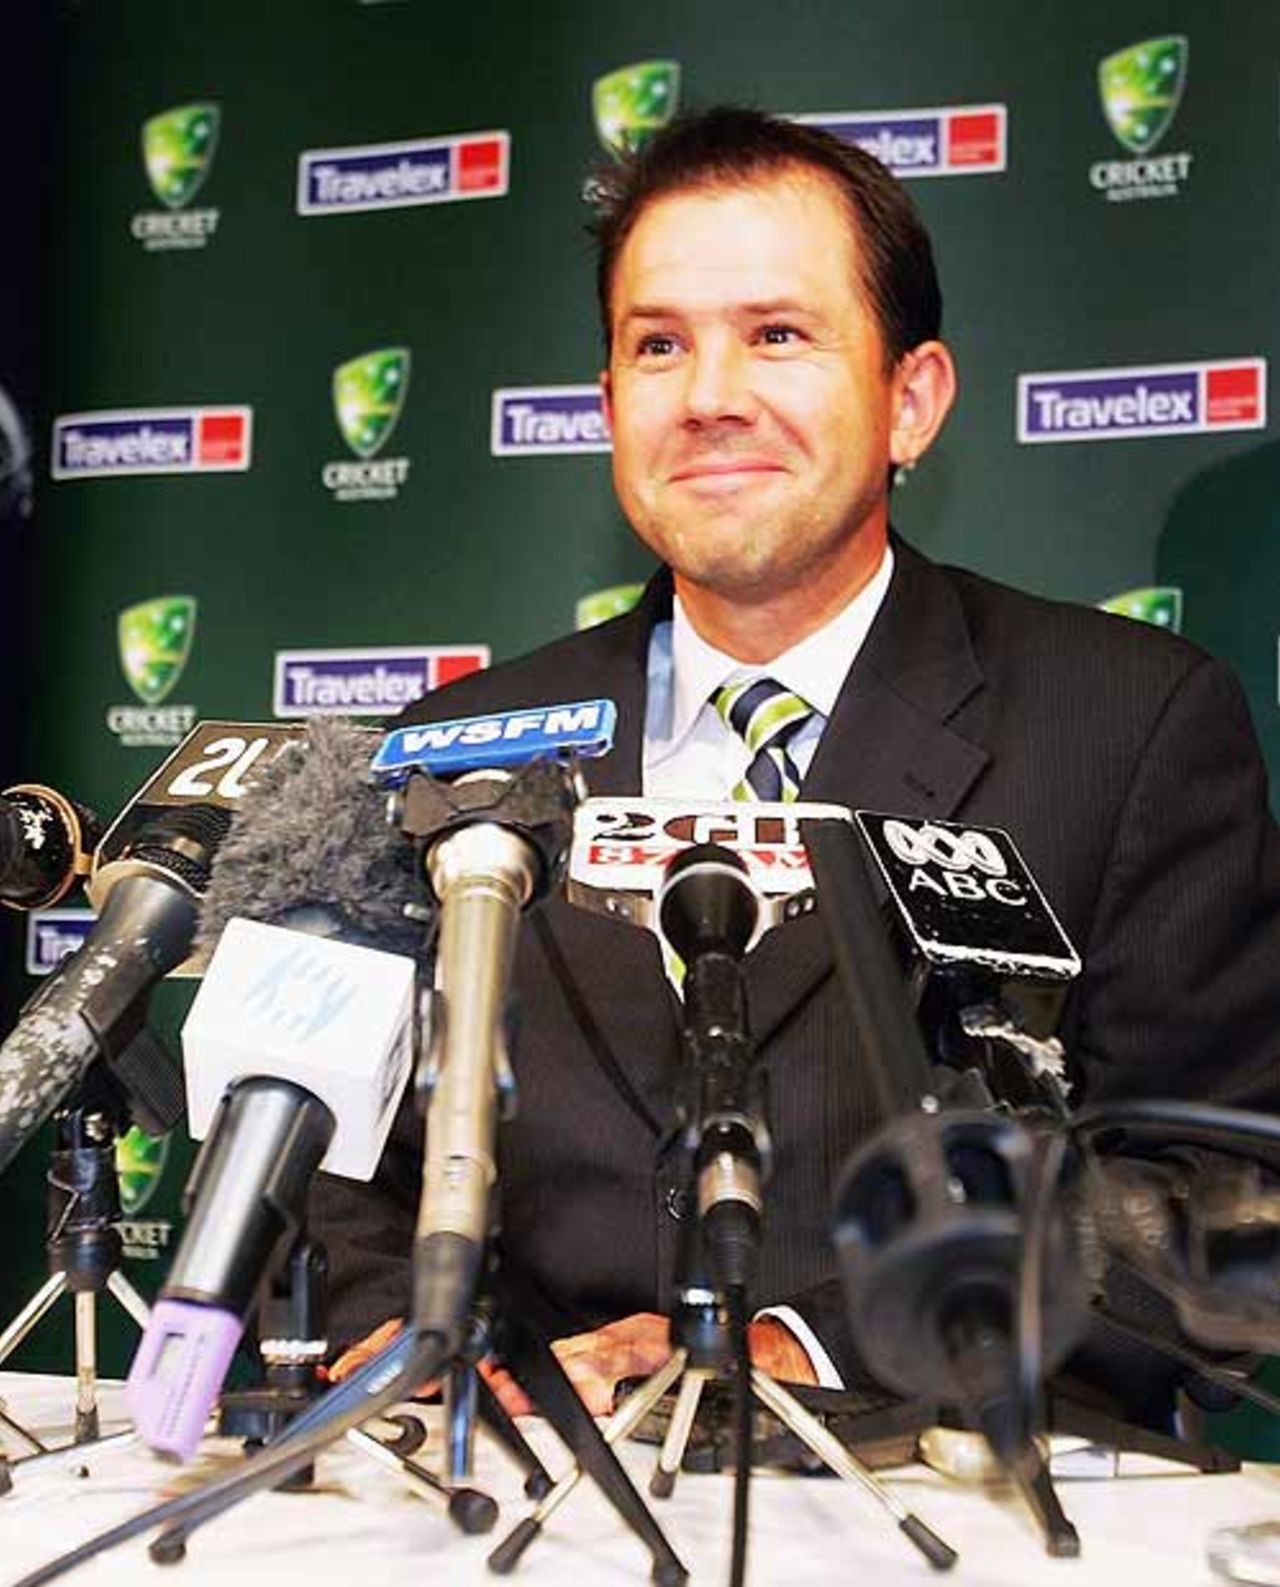 An effervescent Ricky Ponting puts up a smiling face on arrival at Sydney International Airport after Australia's Champions Trophy victory, Sydney, November 7, 2006 